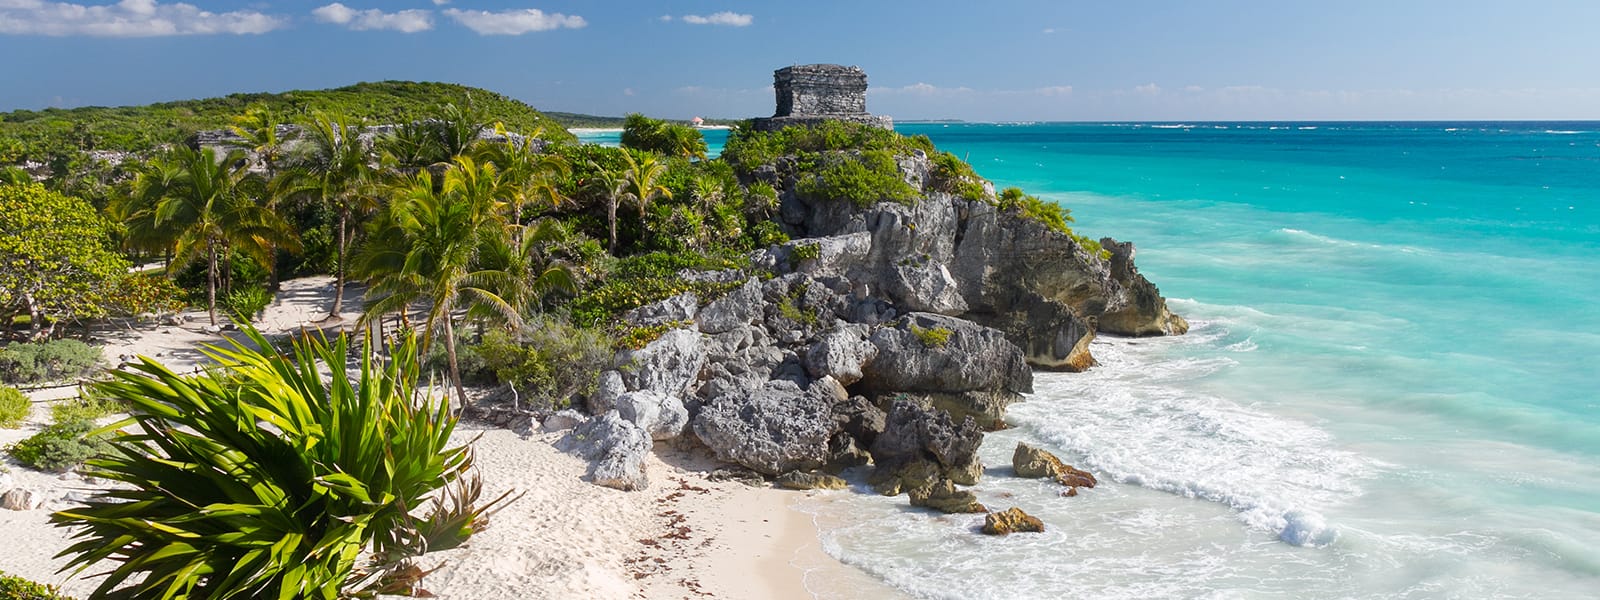 Exclusive and private Tulum tour for small groups